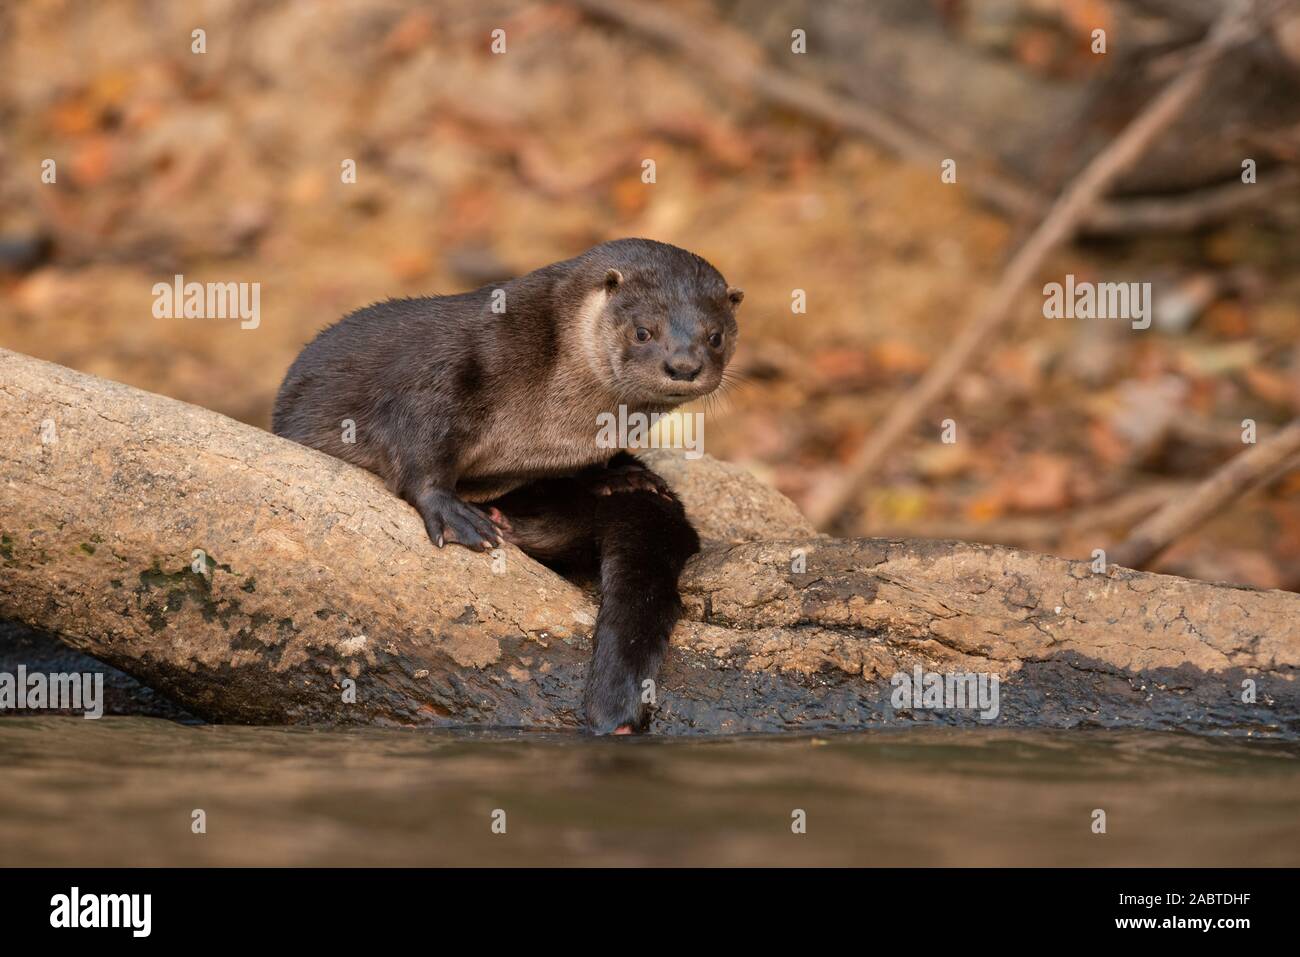 A Neotropical Otter (Lontra longicaudis) from South Pantanal, Brazil Stock Photo